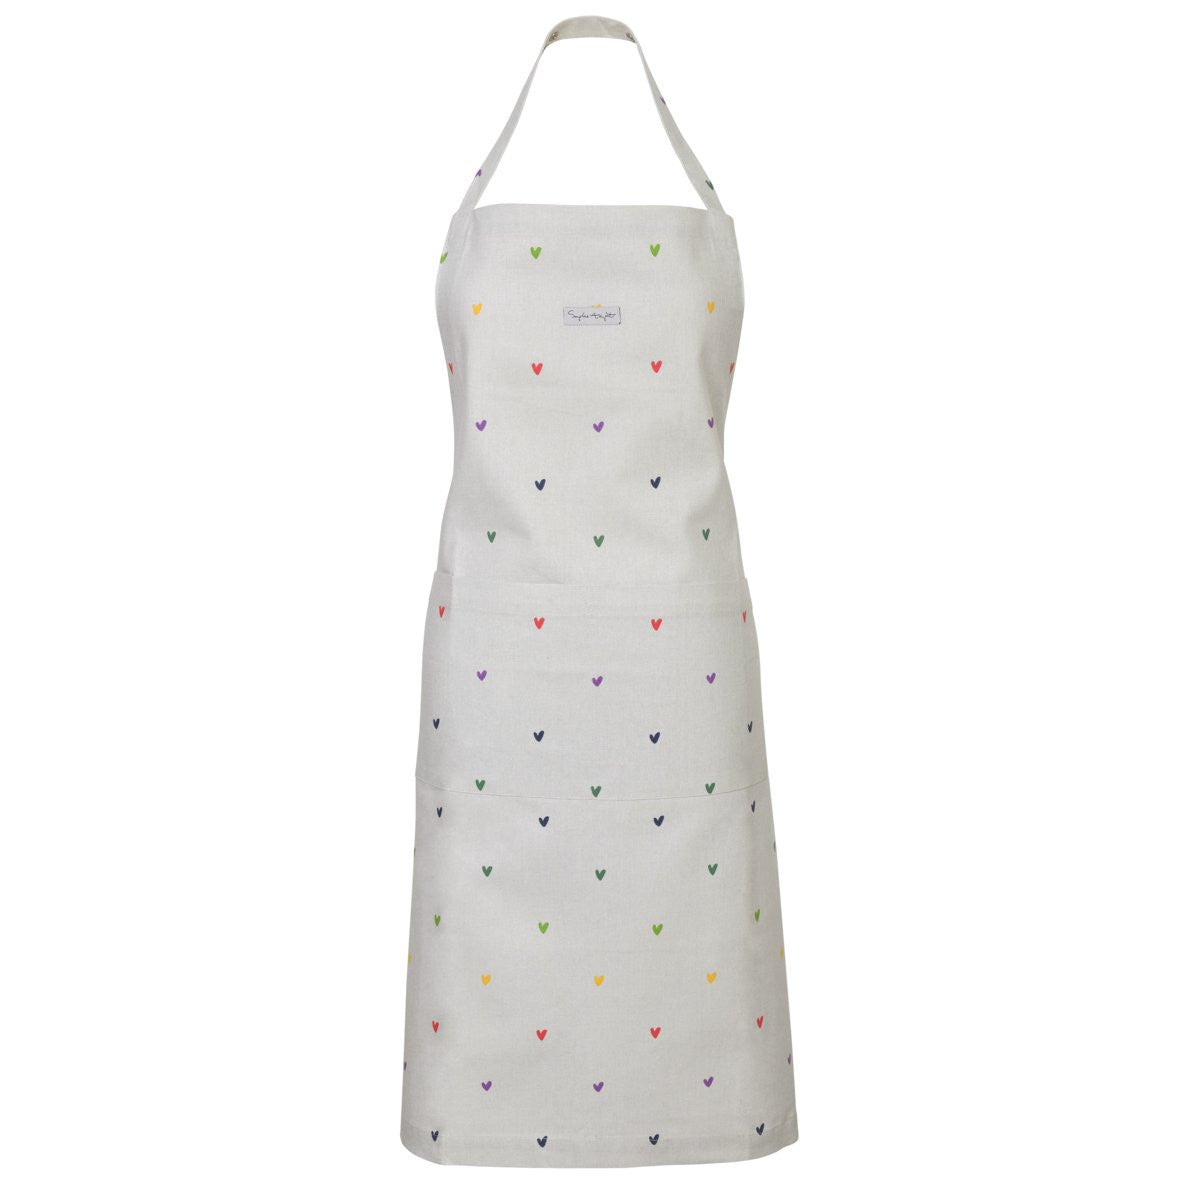 Multicolored Hearts apron by Sophie Allport.